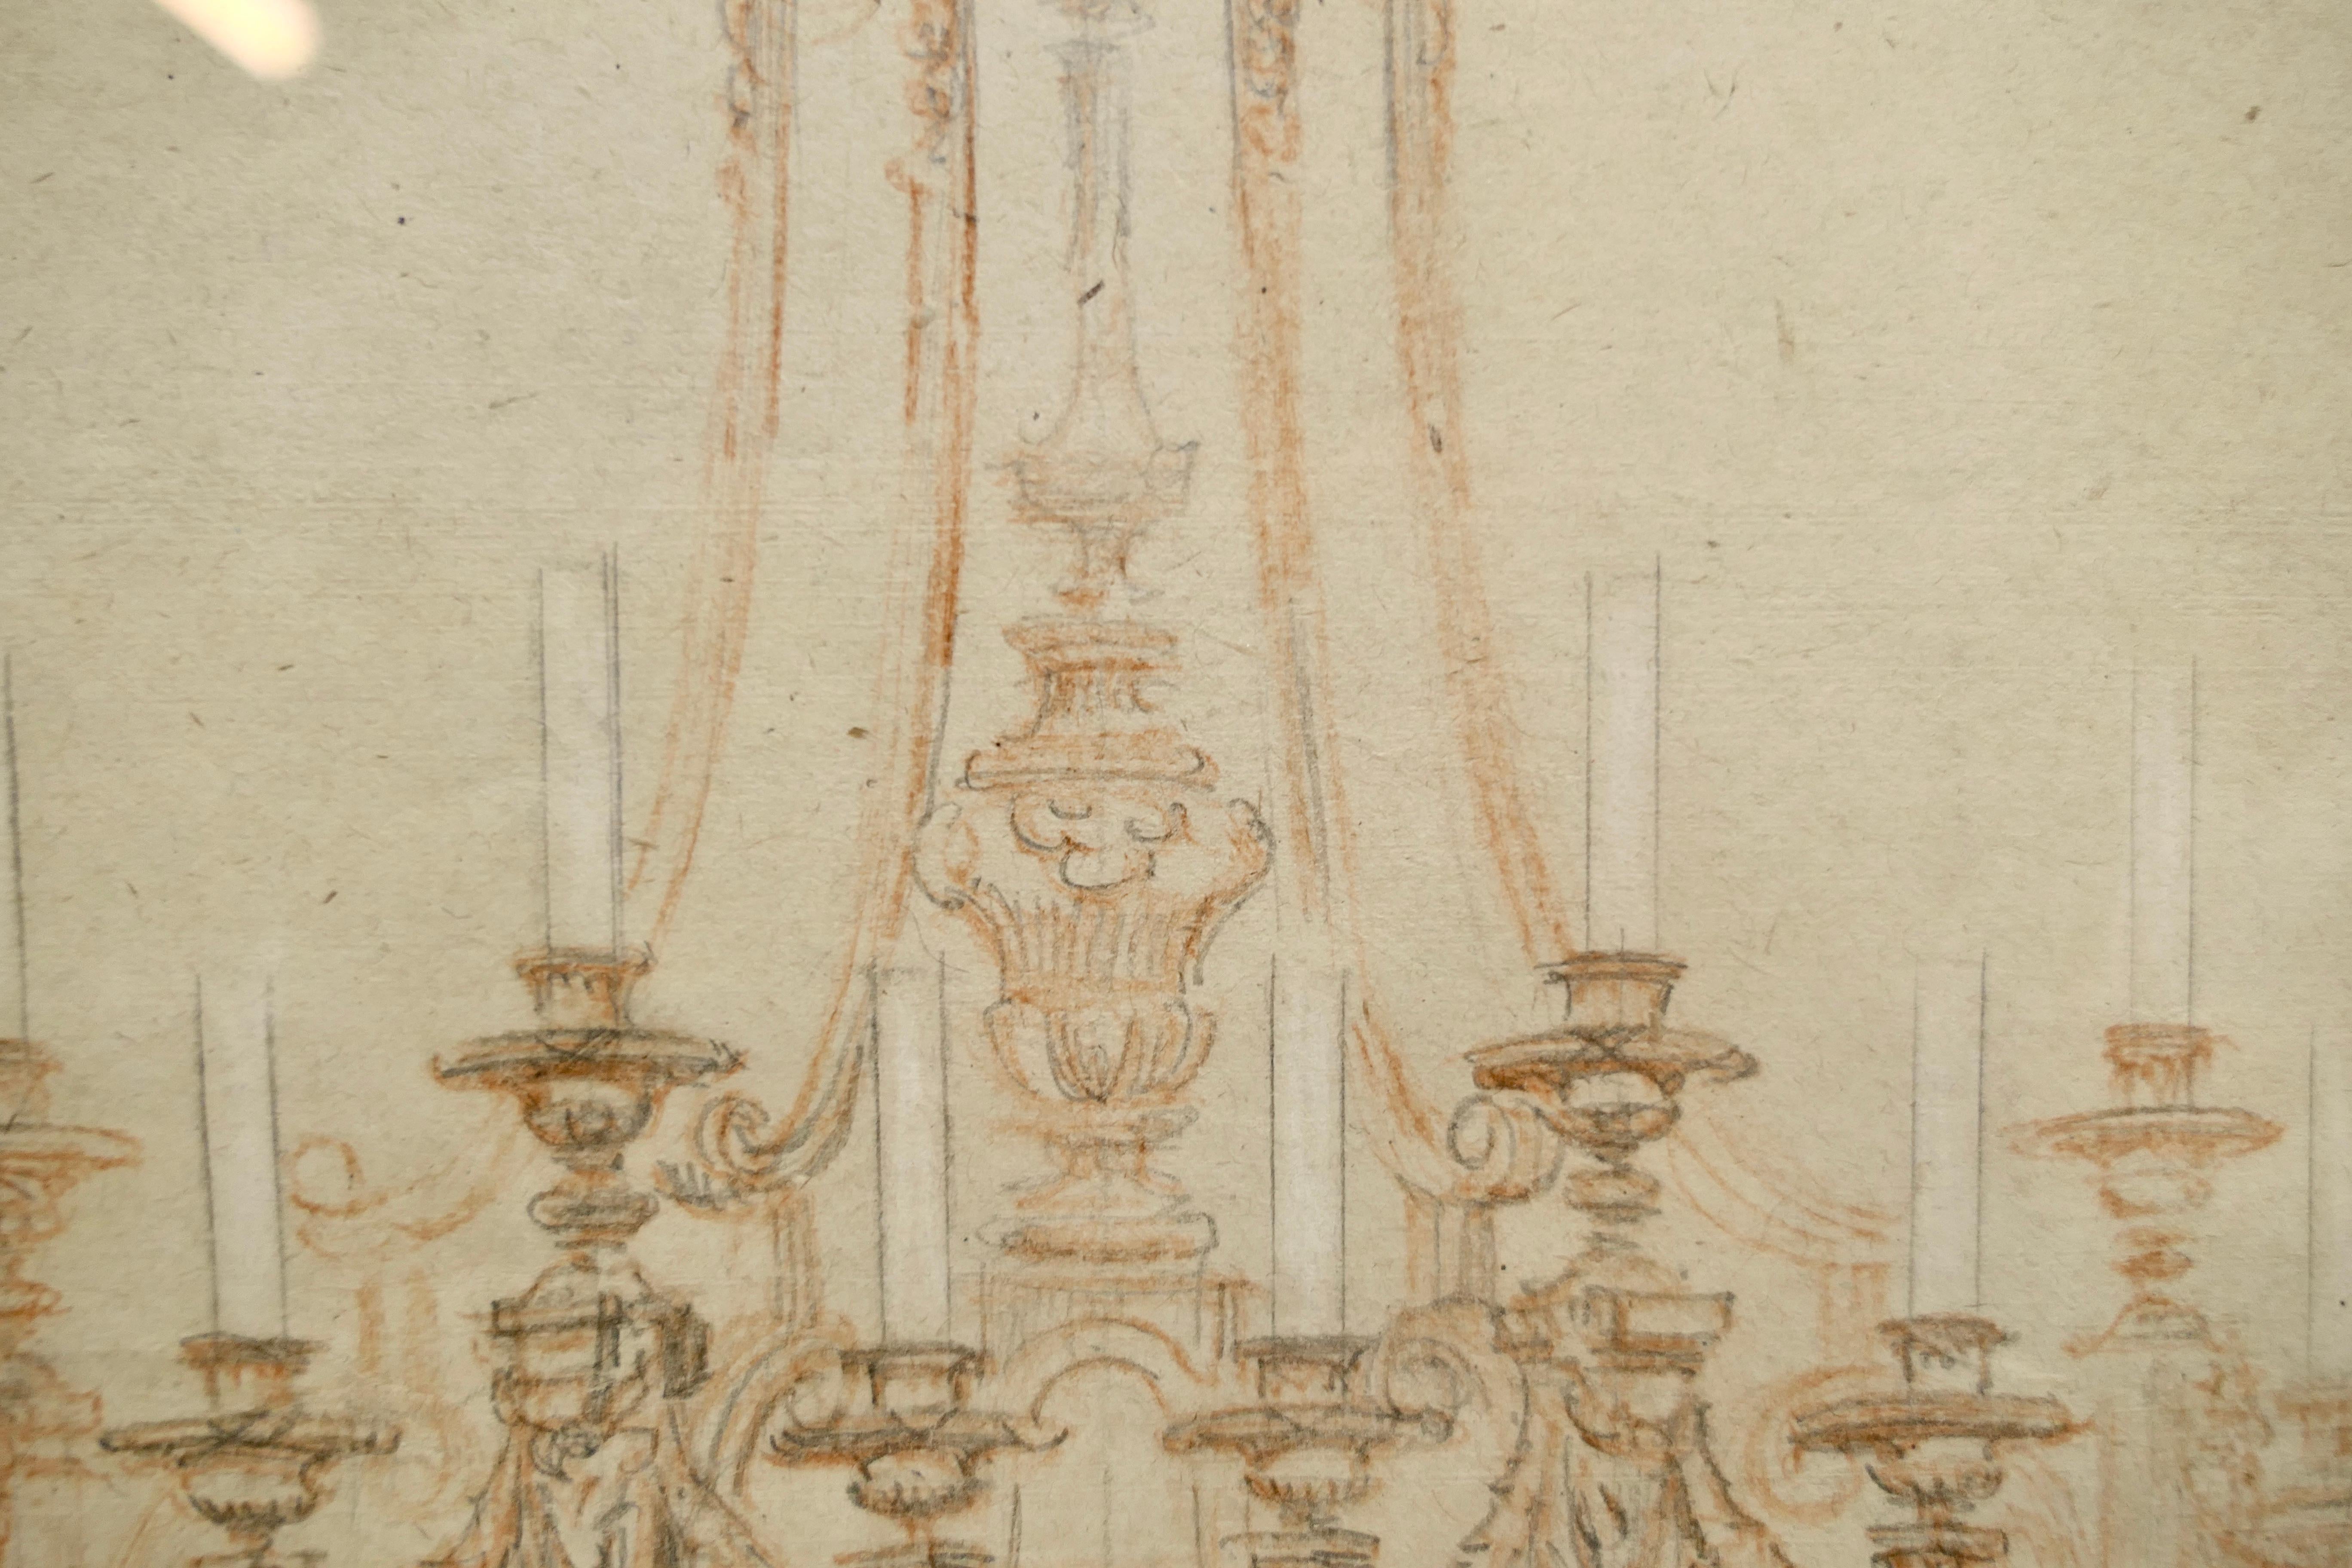 Paper Multi Branch Arts and Crafts Chandelier Illustration Attributed to Amor Fenn For Sale